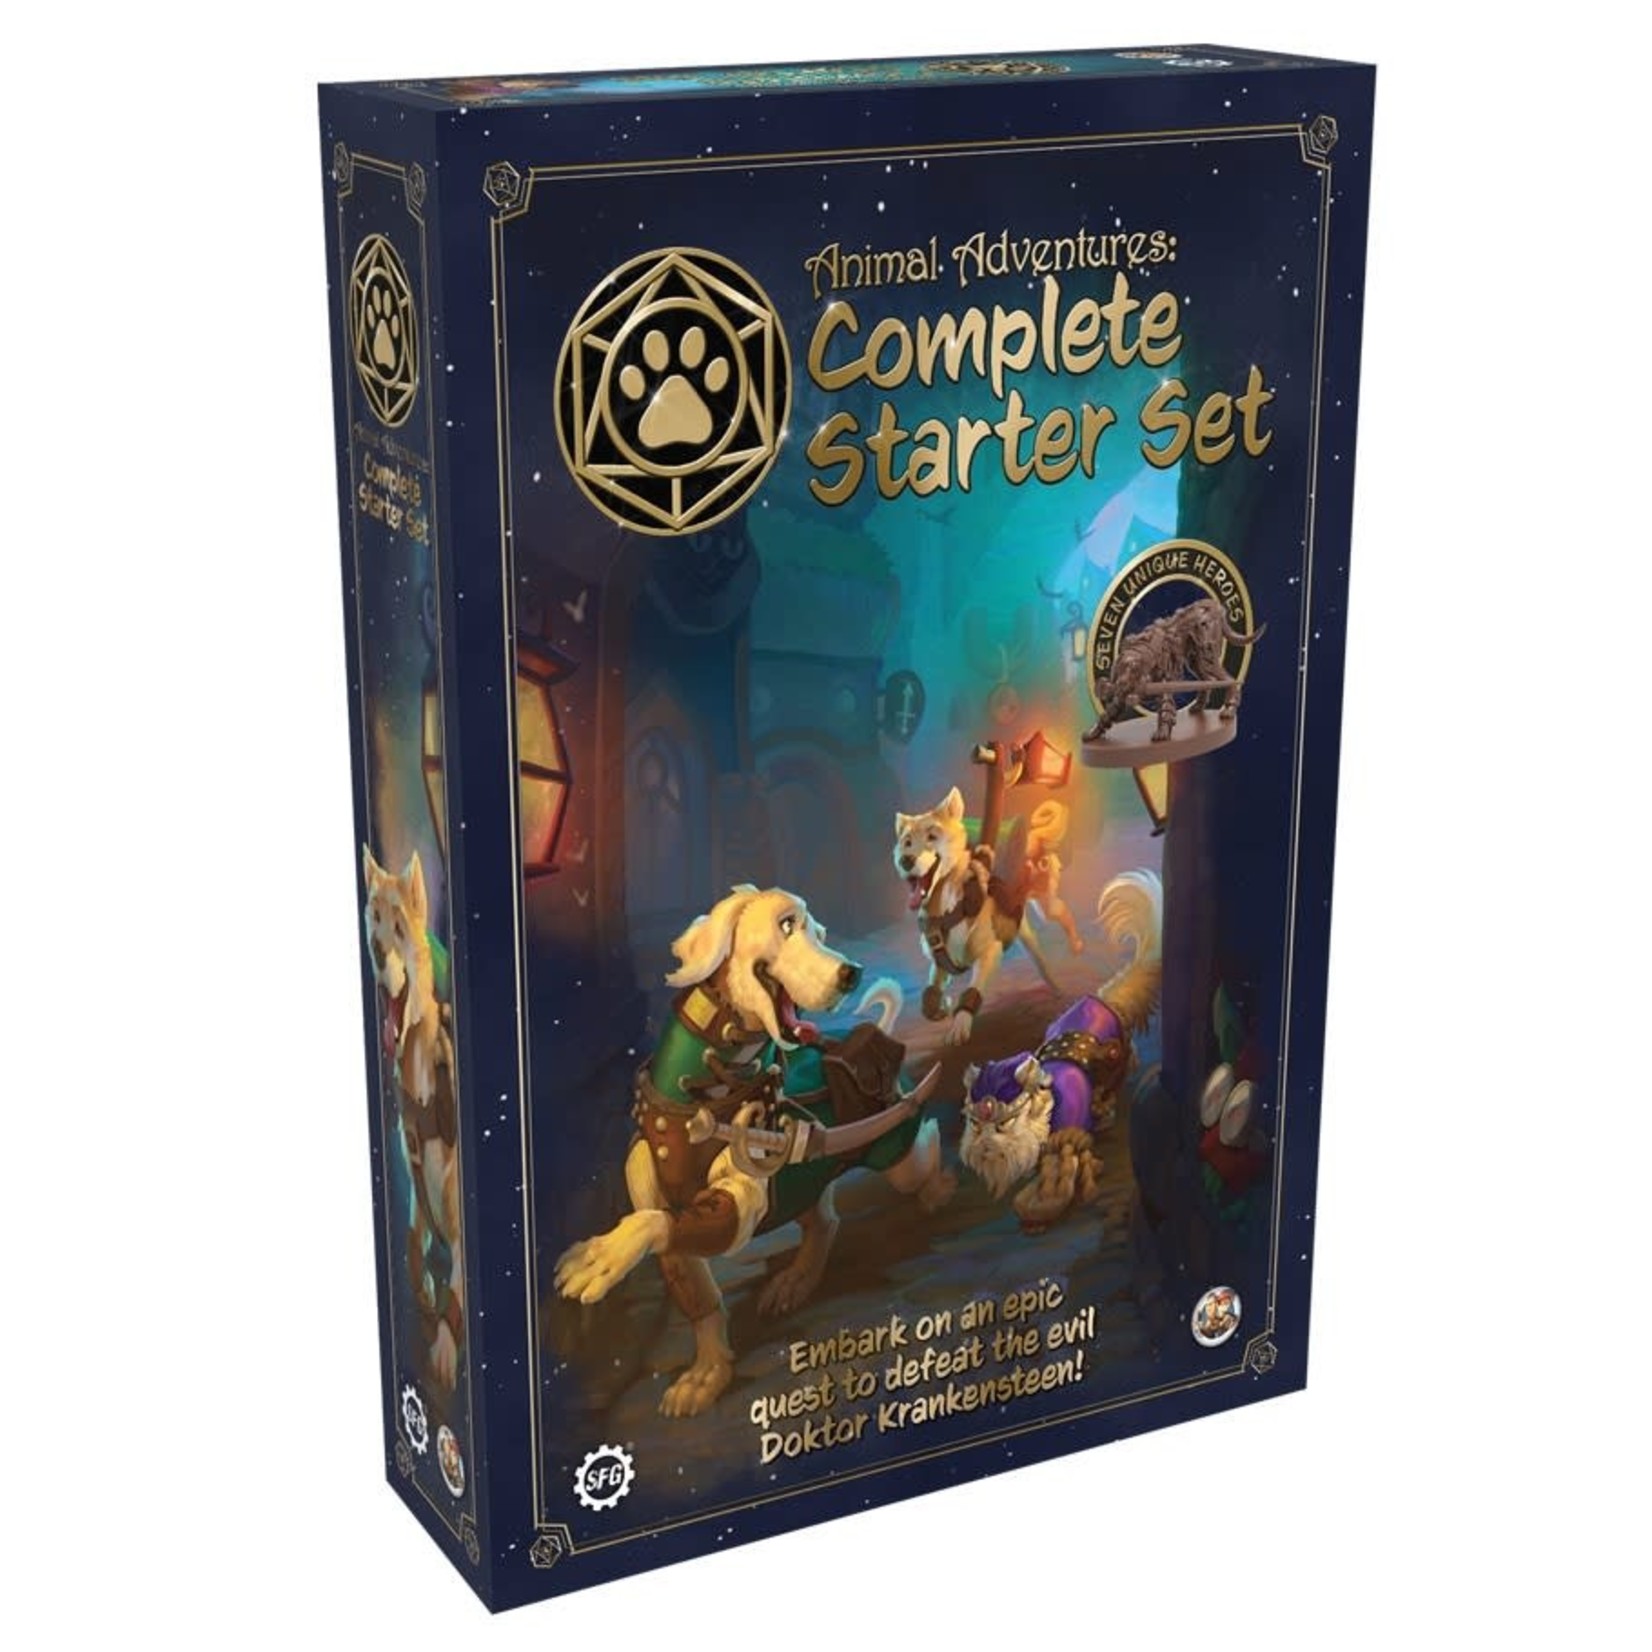 Steamforged Animal Adventures: Complete Starter Set (Roleplaying Game)